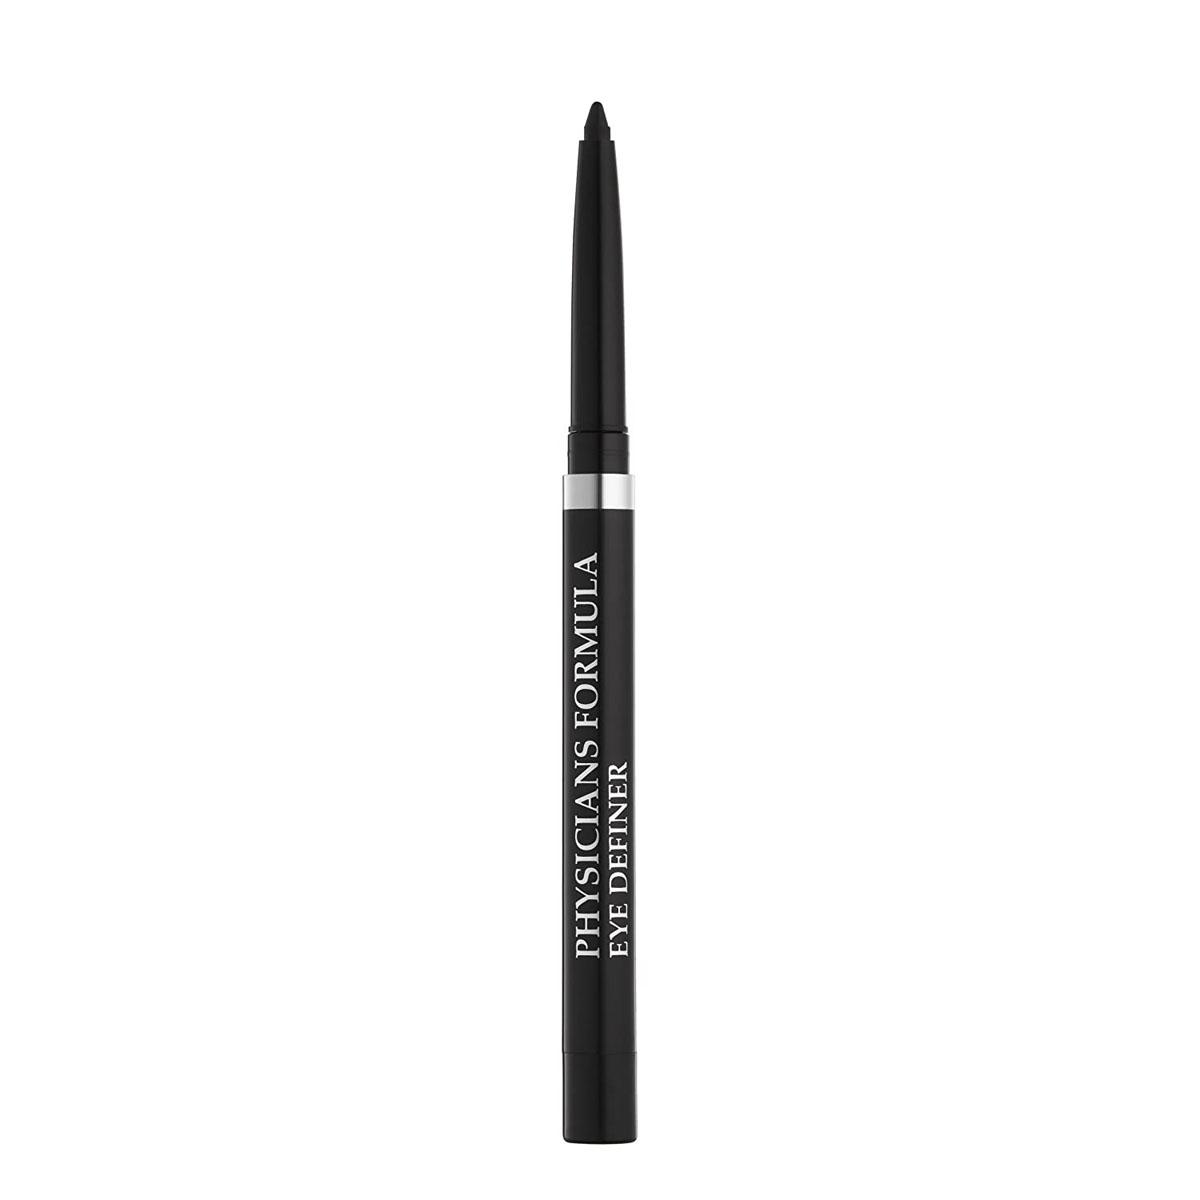 Physicians Formula Eye Definer Automatic Eye Pencil for $2.15 Shipped